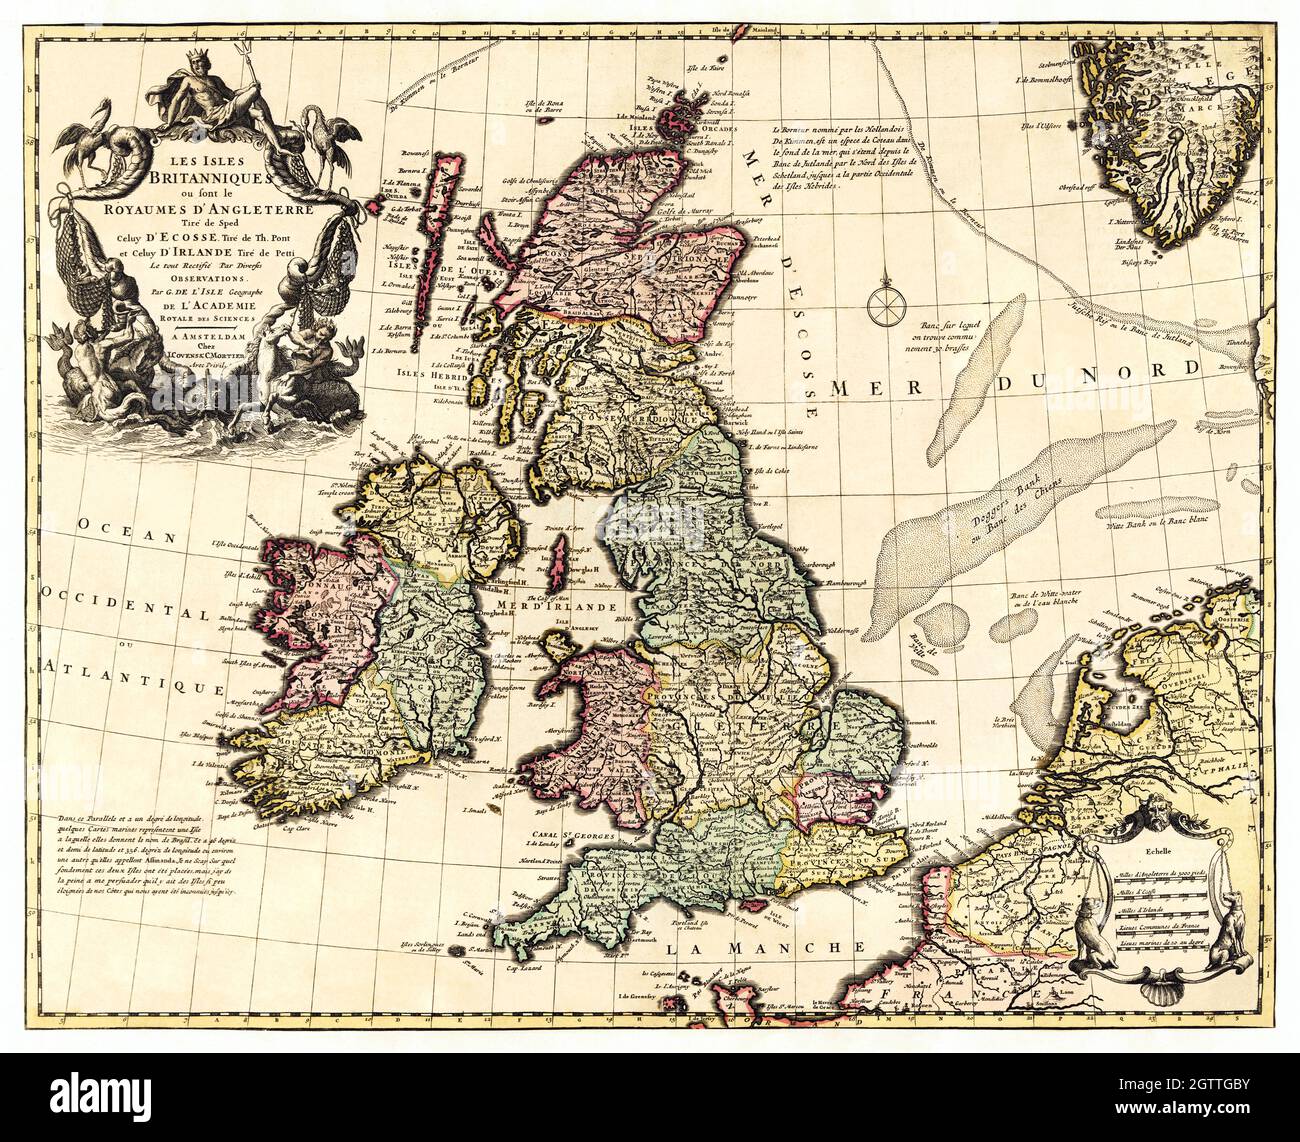 British Isles in early XVIII secolo Map - United Kingdom, Great Britain MAP, 1700s.. Foto Stock